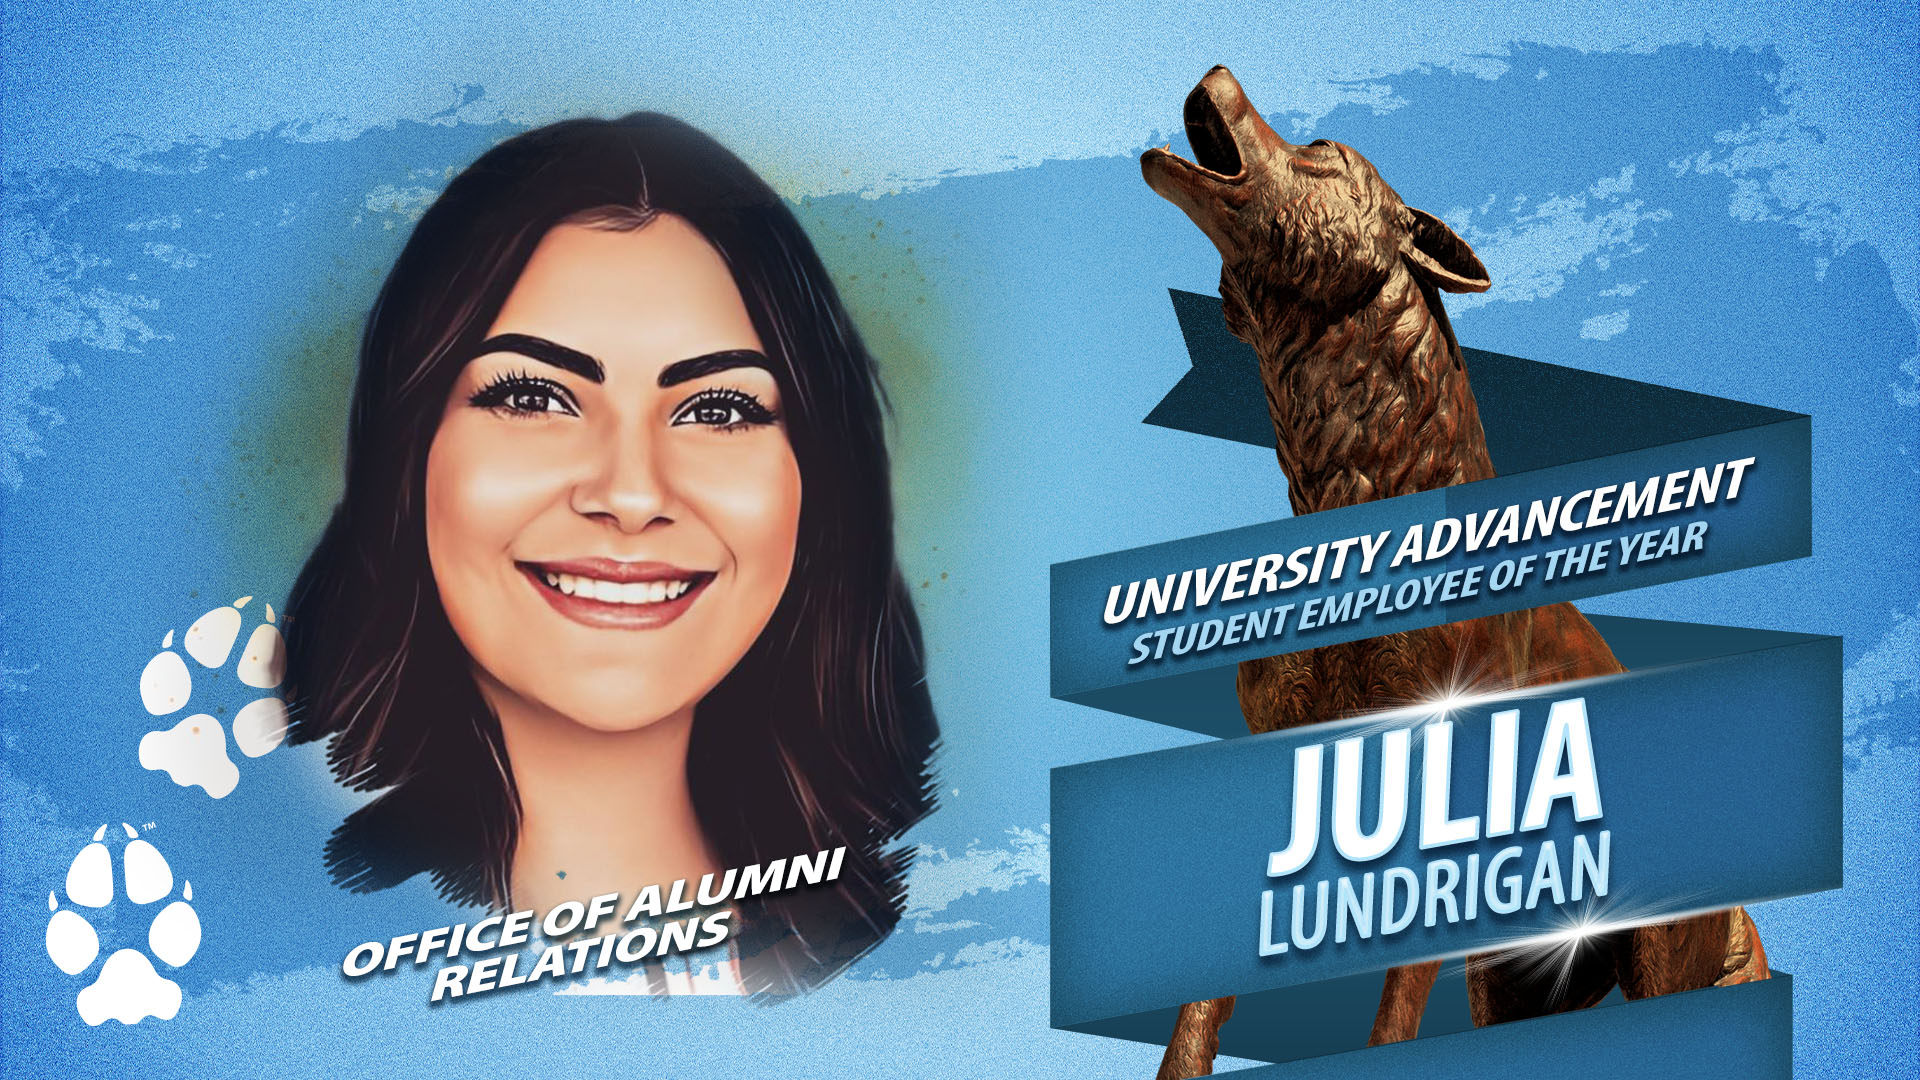 Outstanding Student Employee of the Year for the division of University Advancement Julia Lundrigan